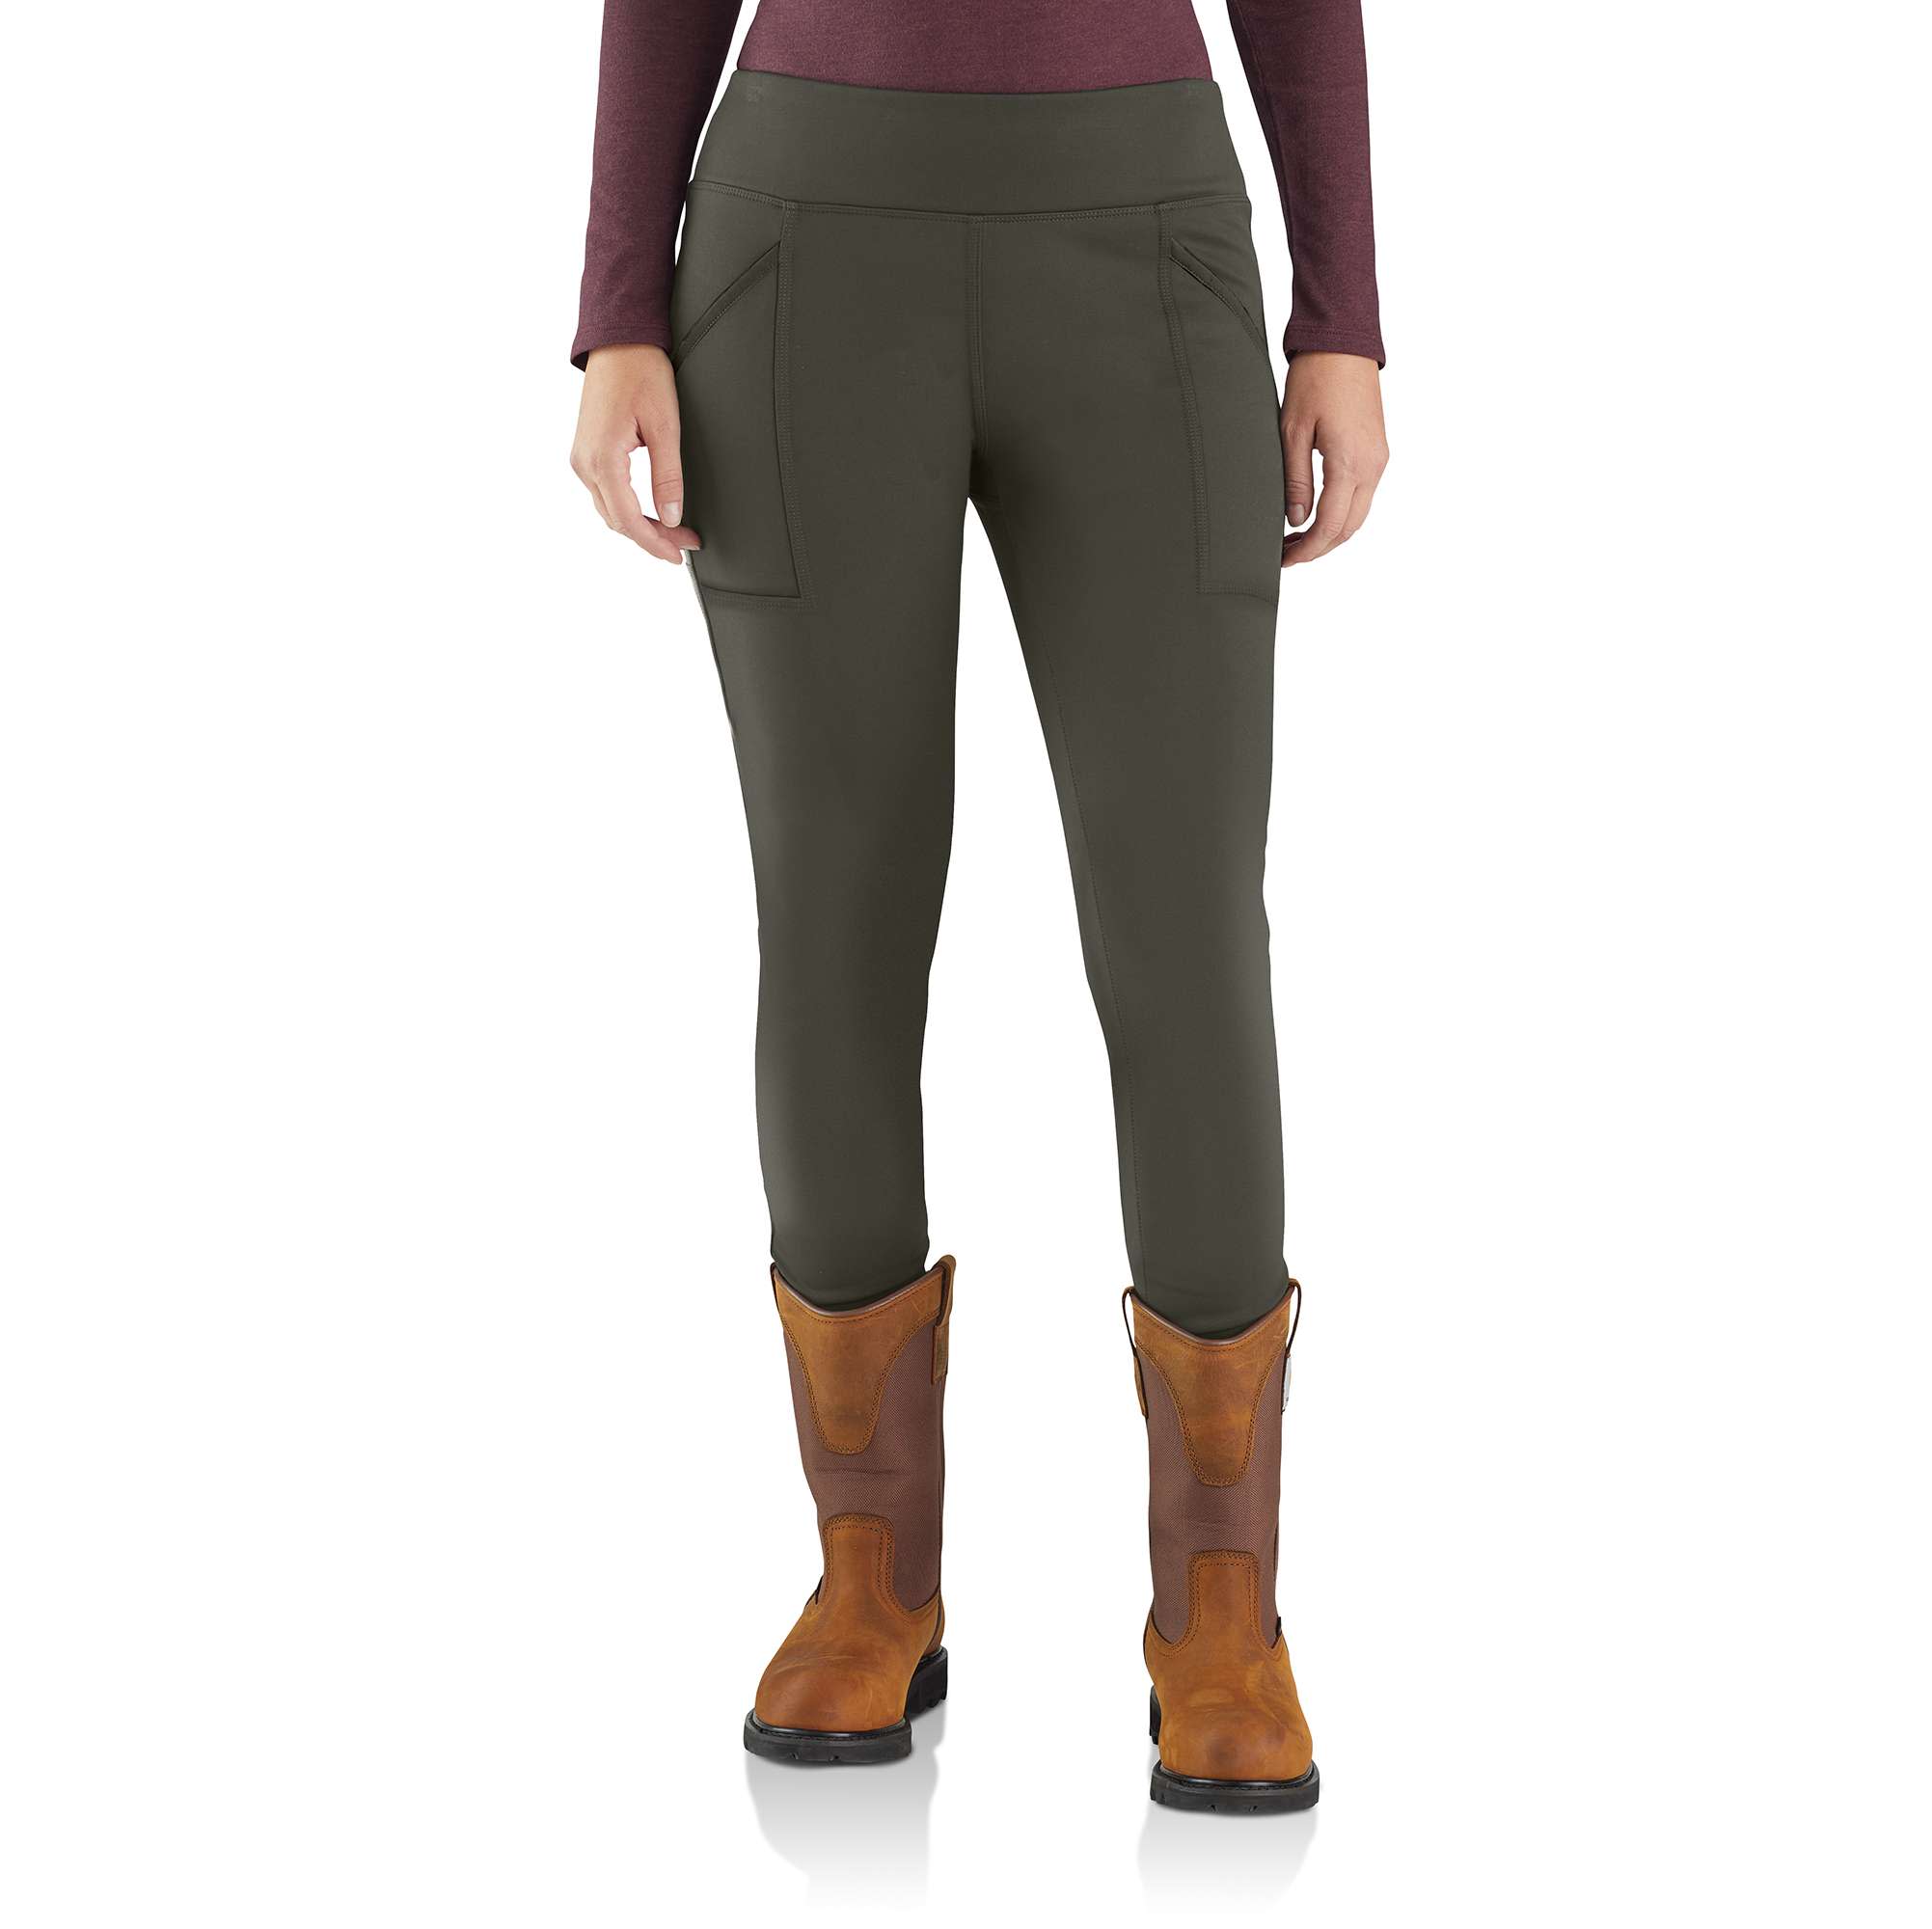 Carhartt Womens Force Fitted Midweight Utility Legging 